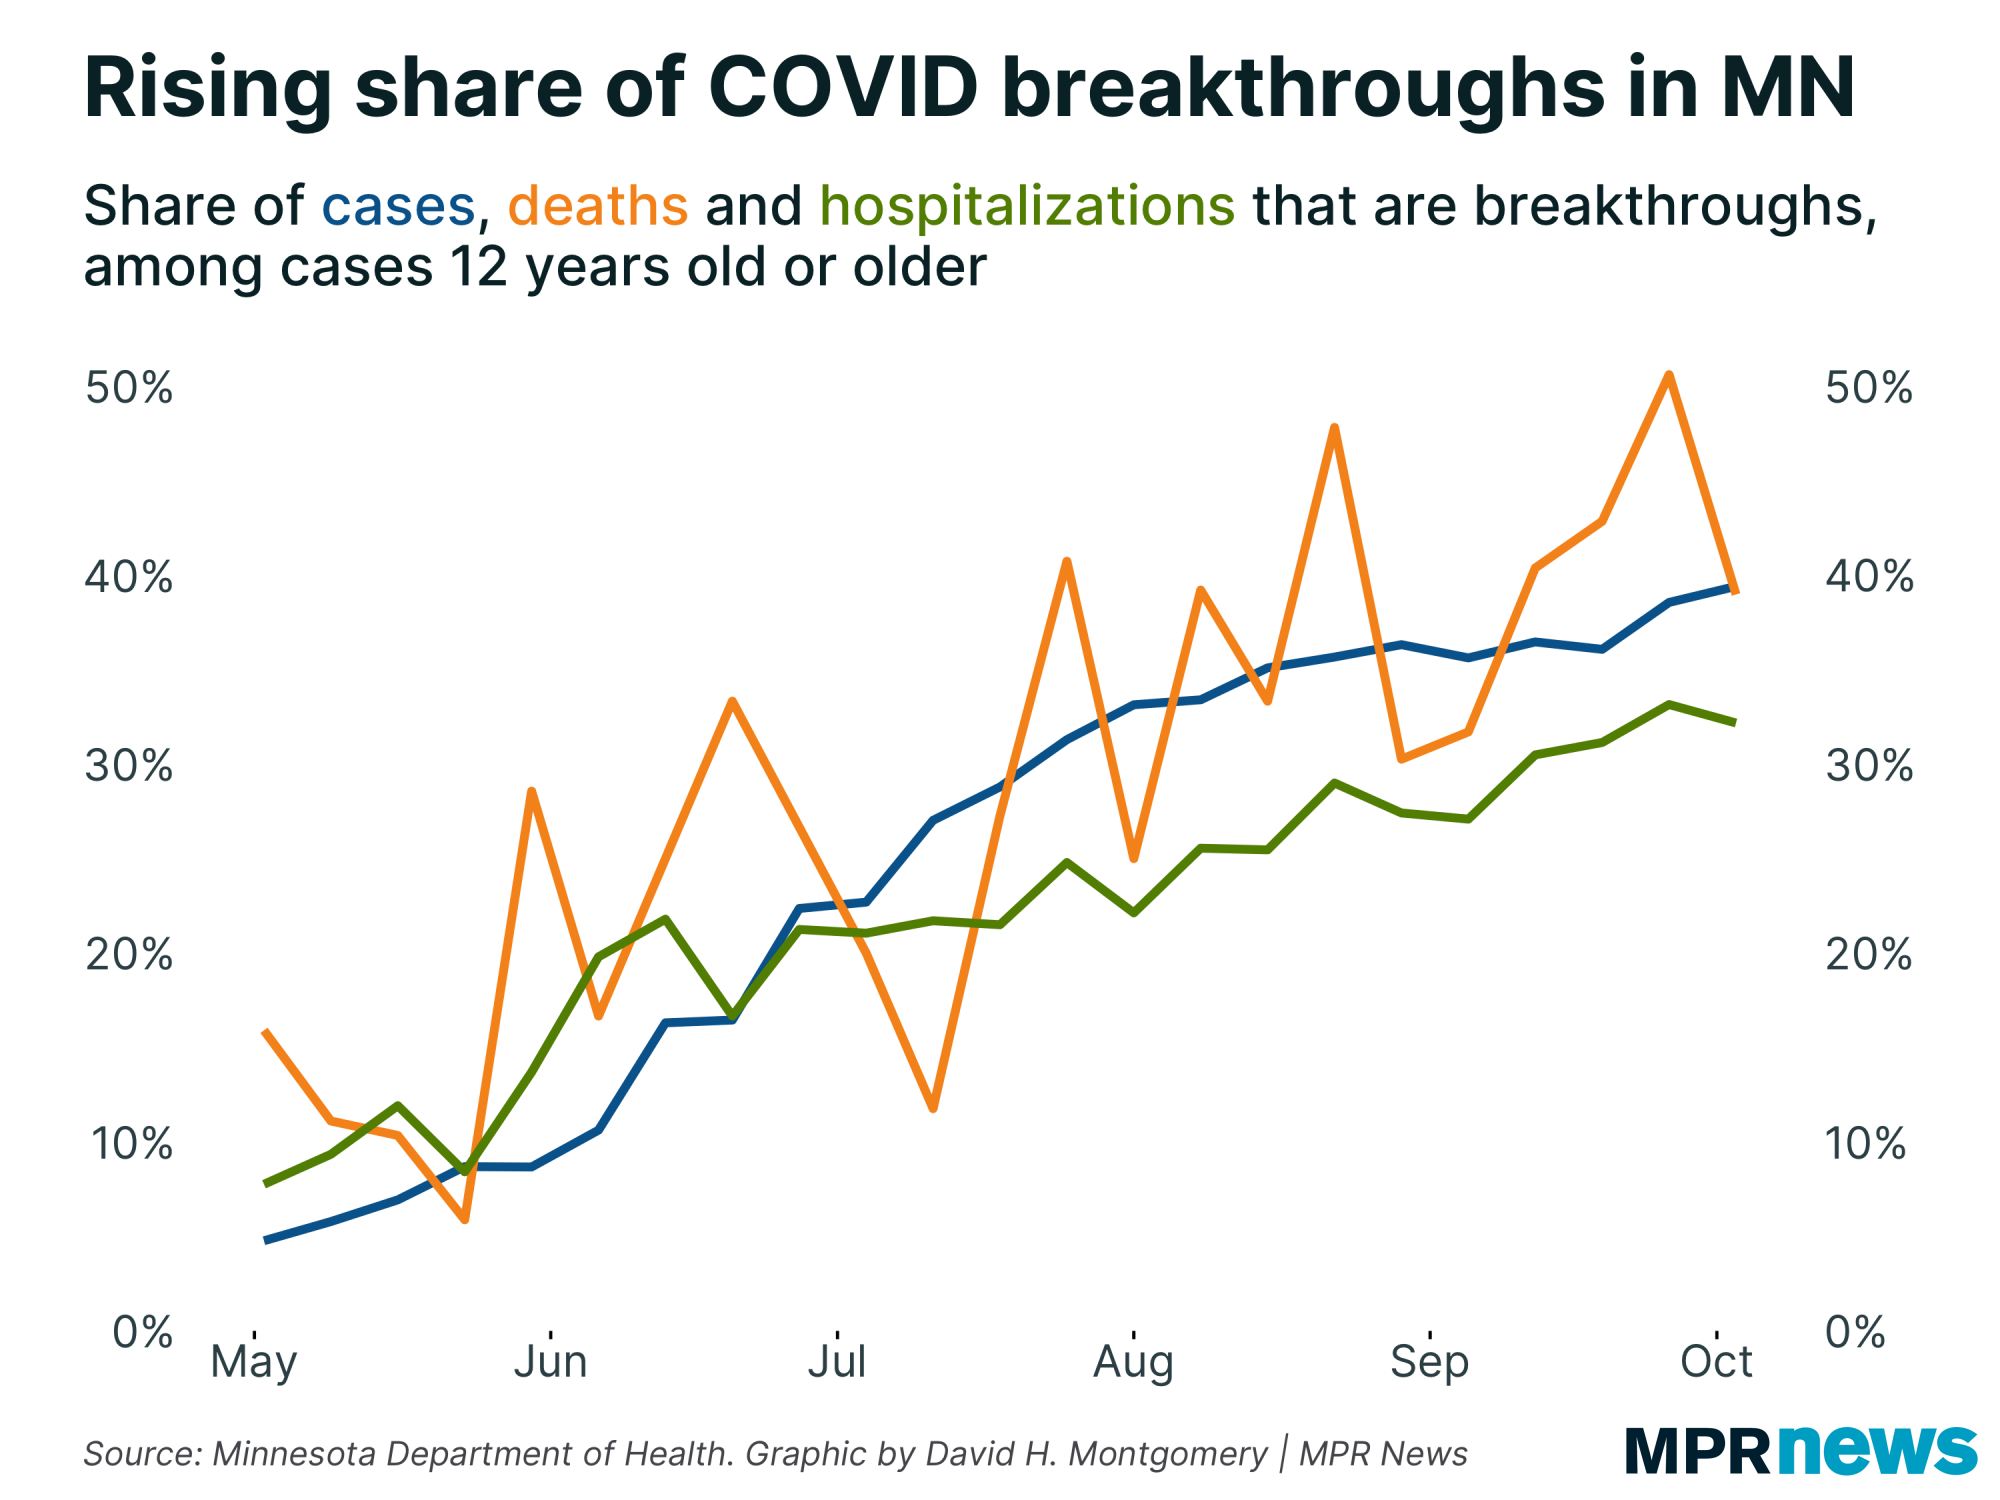 Graph of COVID-19 breakthroughs as a share of total cases, hospitalizations and deaths